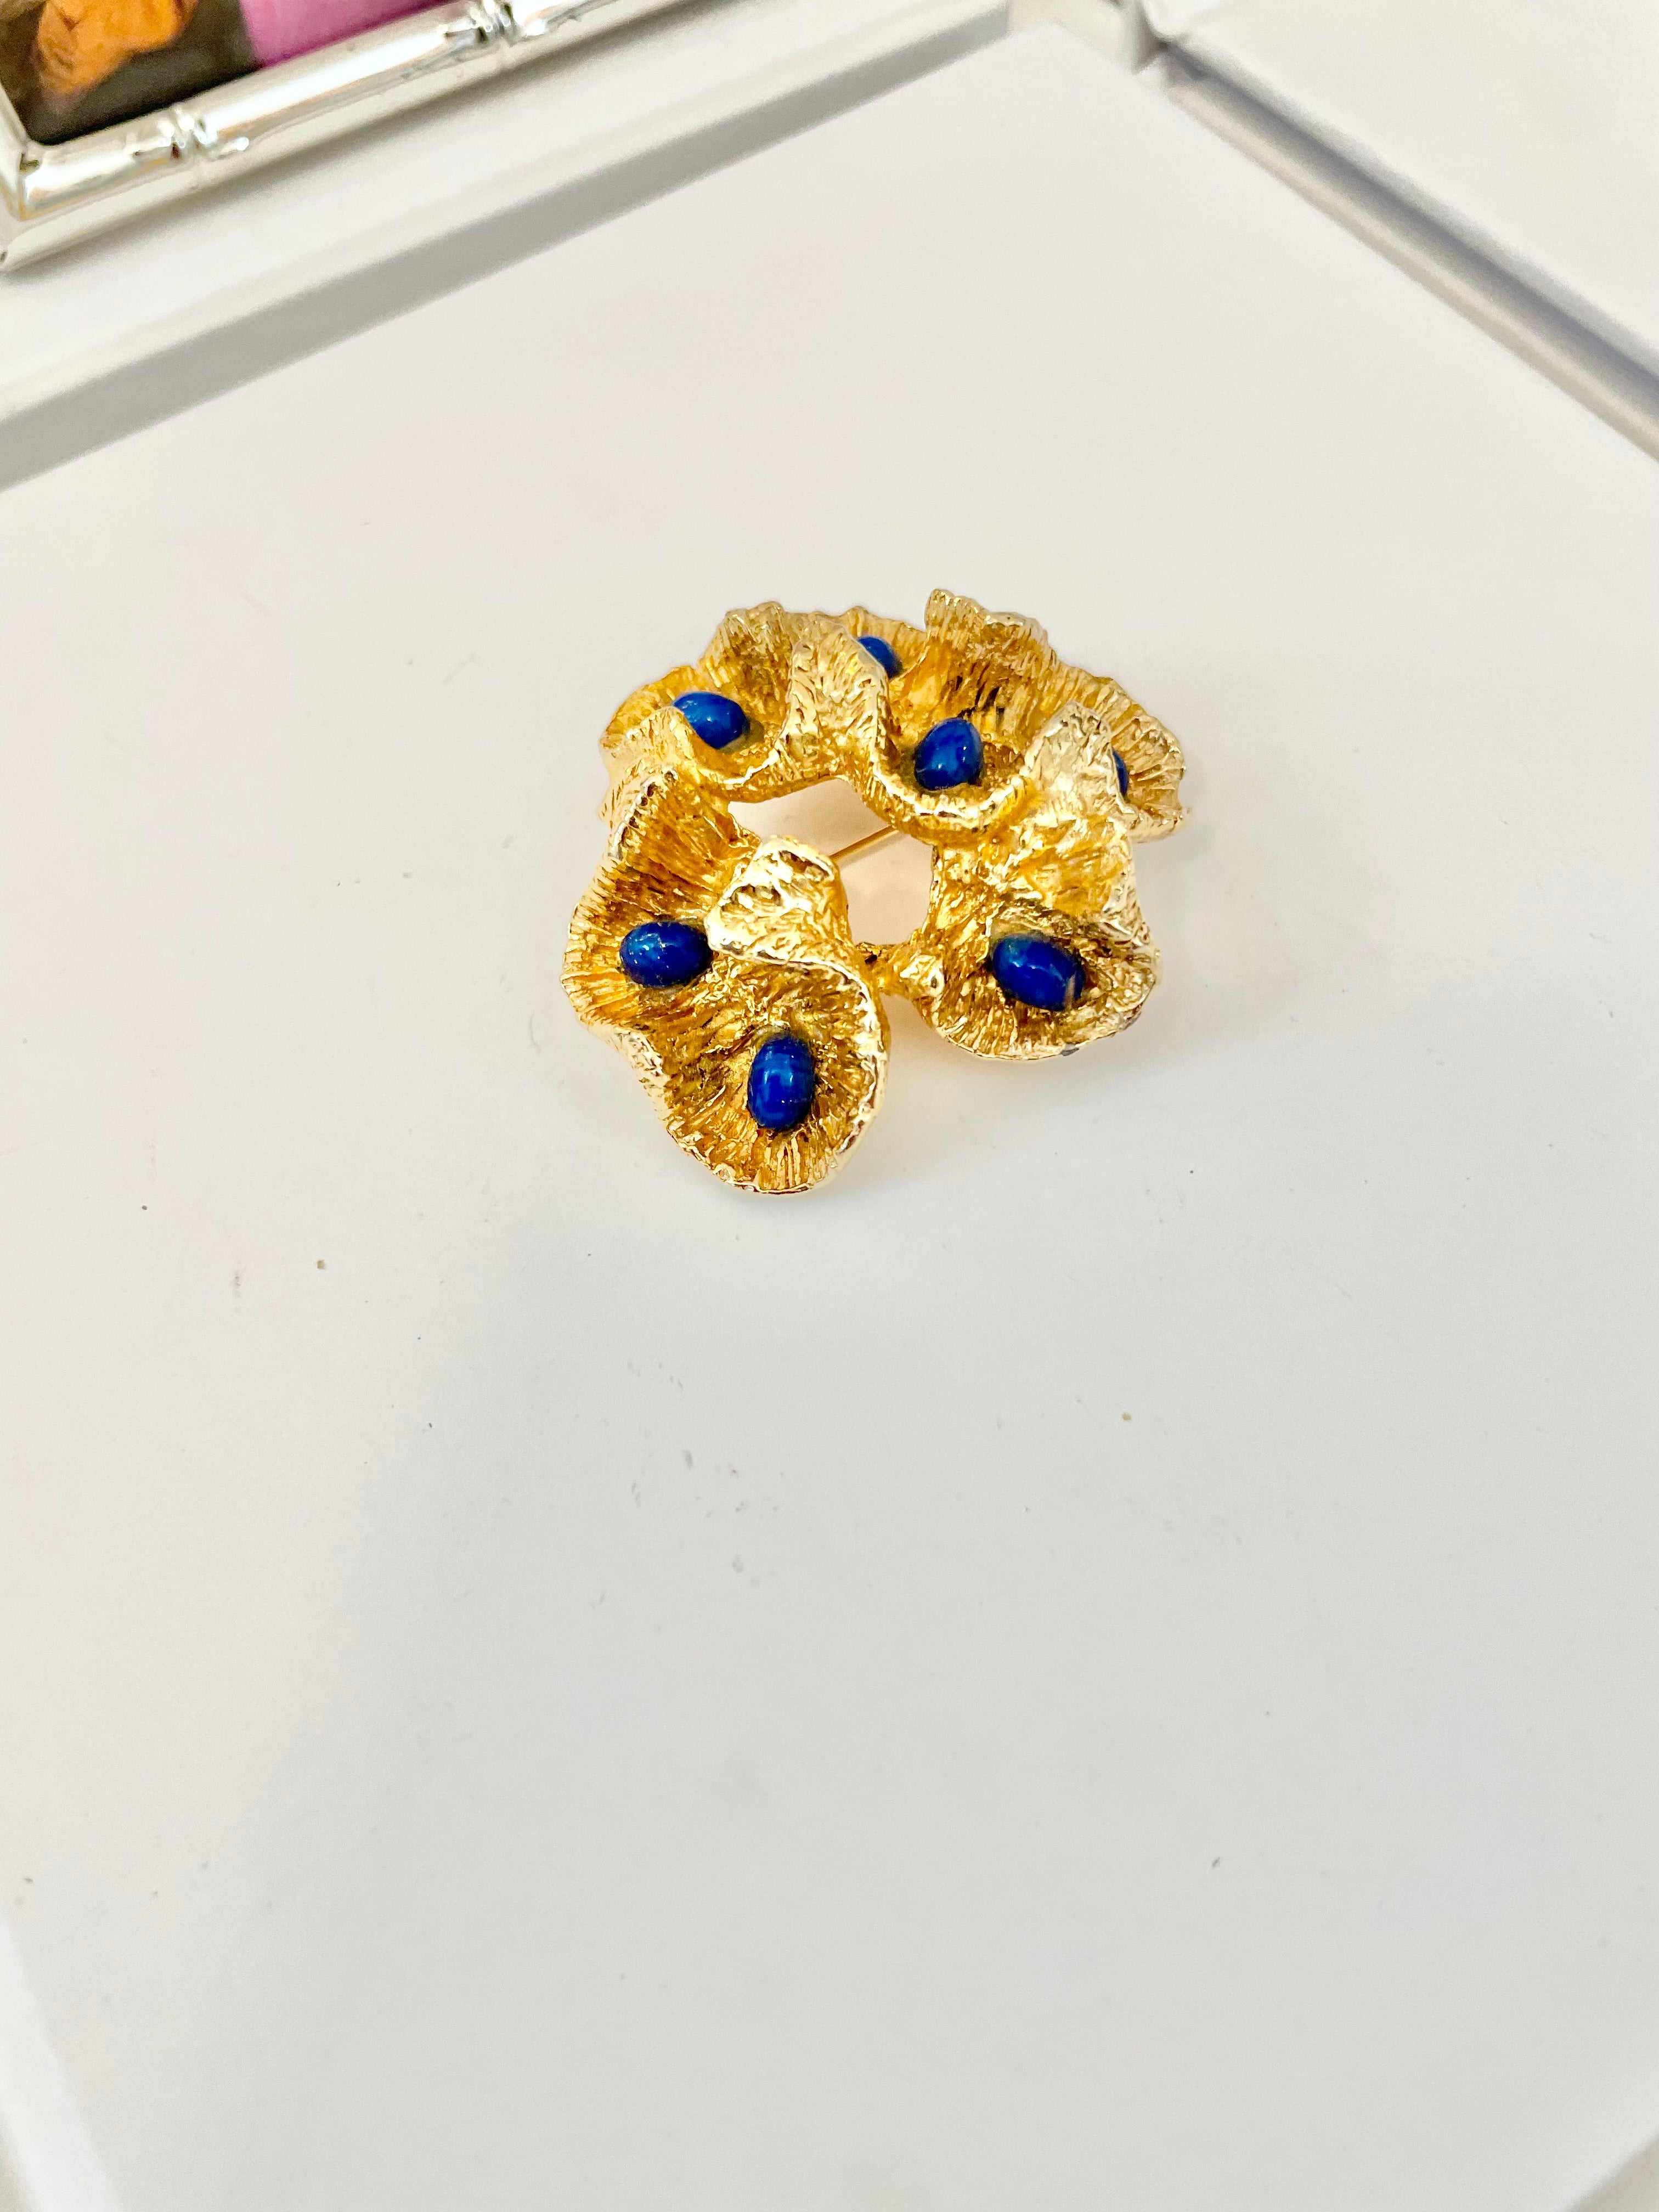 The most chic sculpted gold brooch with faux lapis stones.... so brilliant!